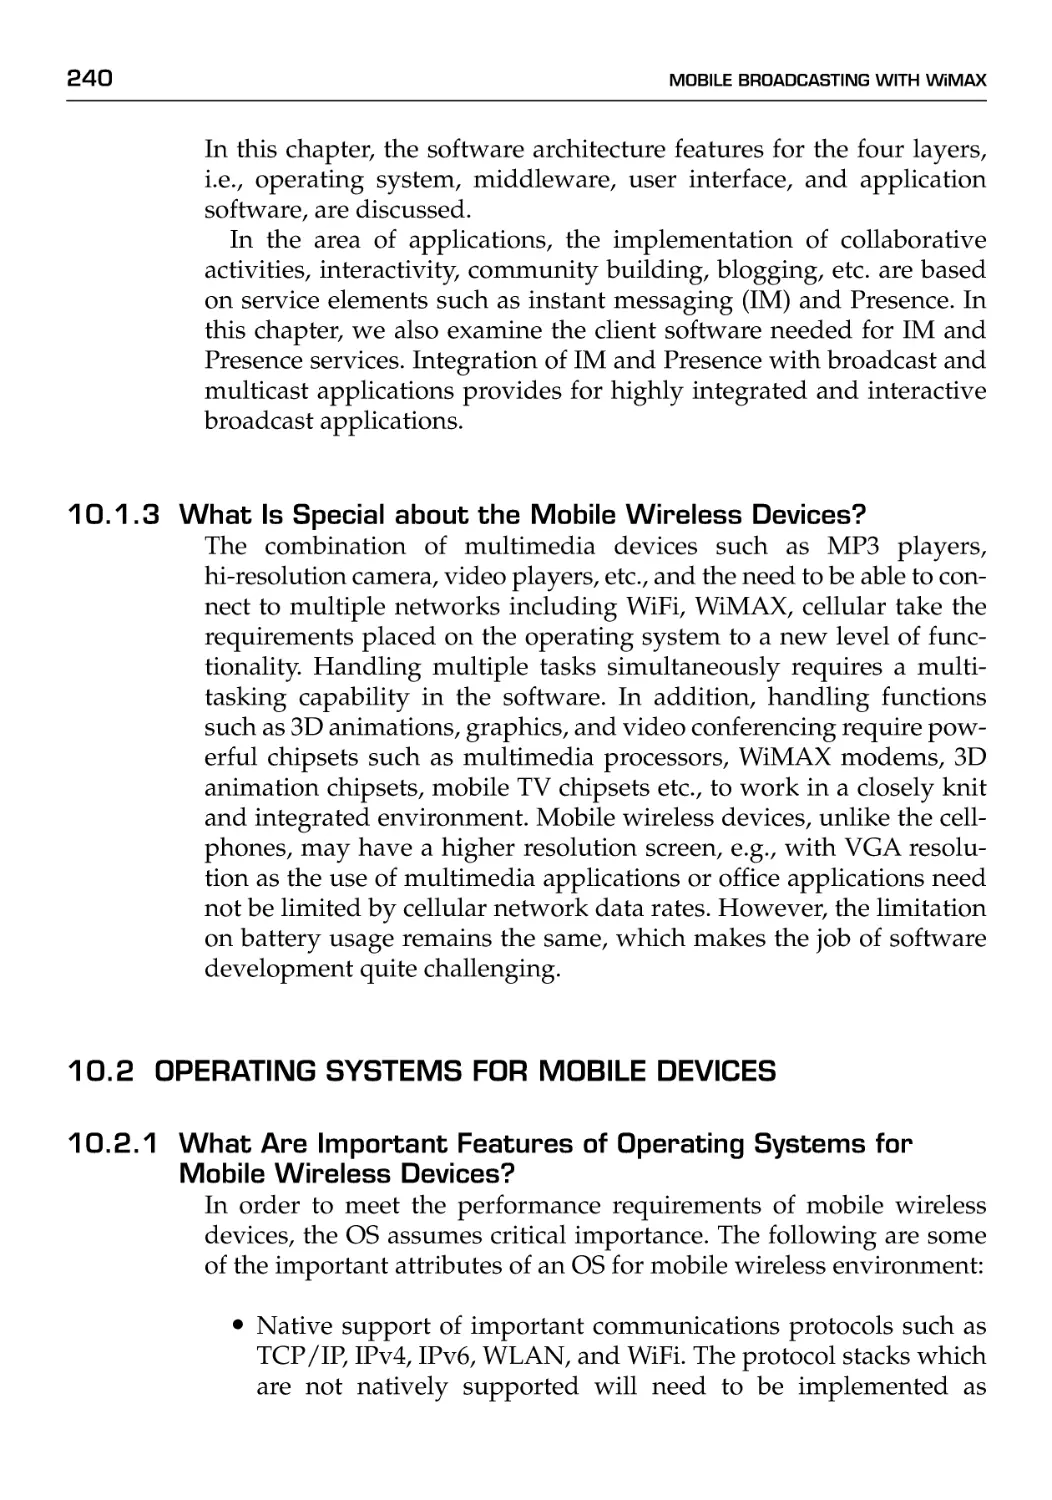 10.2 Operating Systems for Mobile Devices